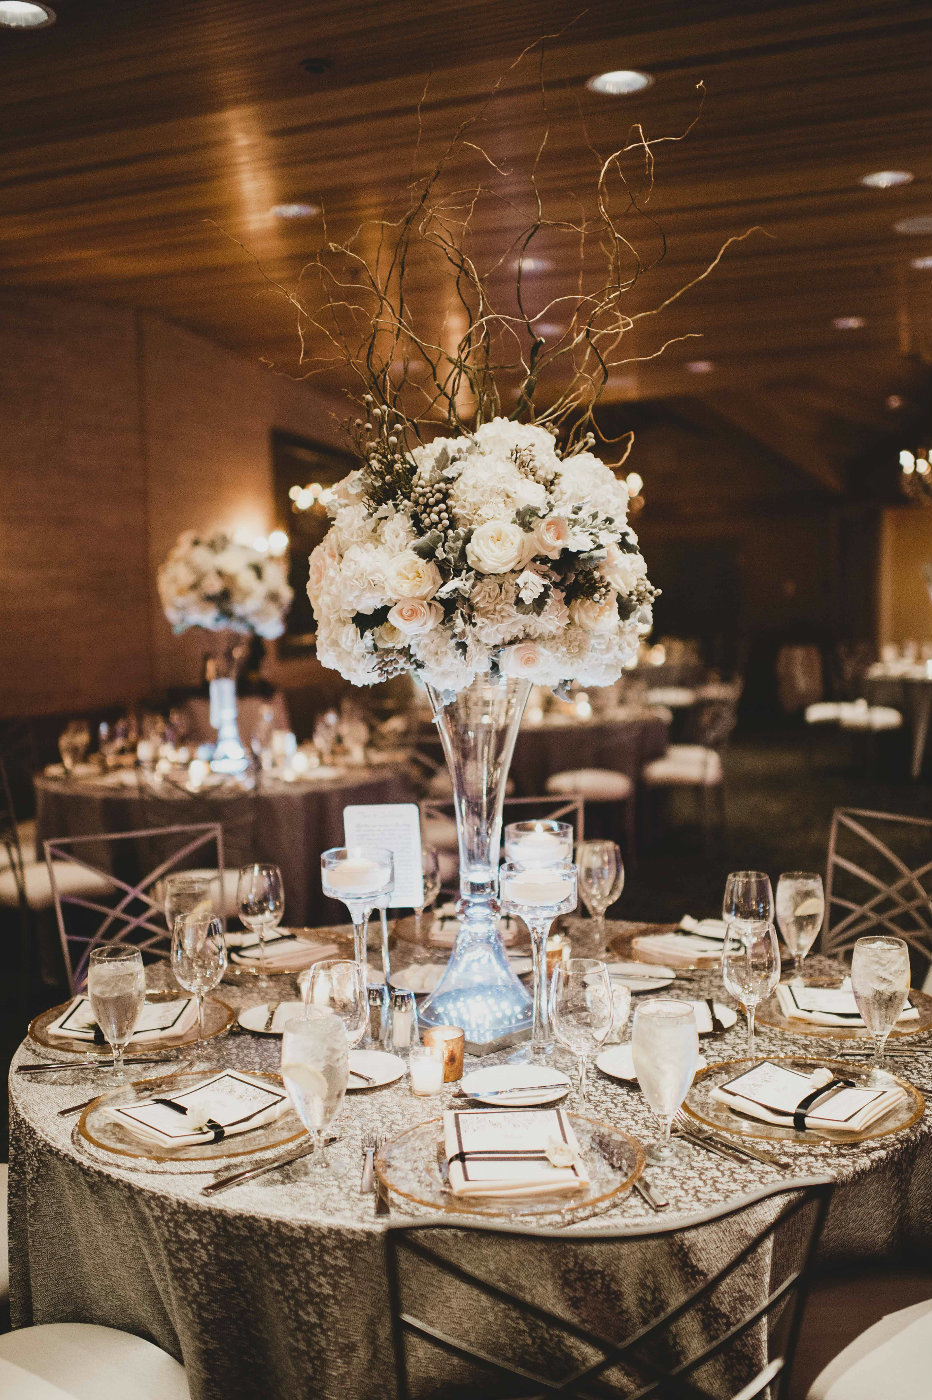 Luxurious tall table arrangement of willow, white hydrangea and eucalyptus with shimmery silver linens.